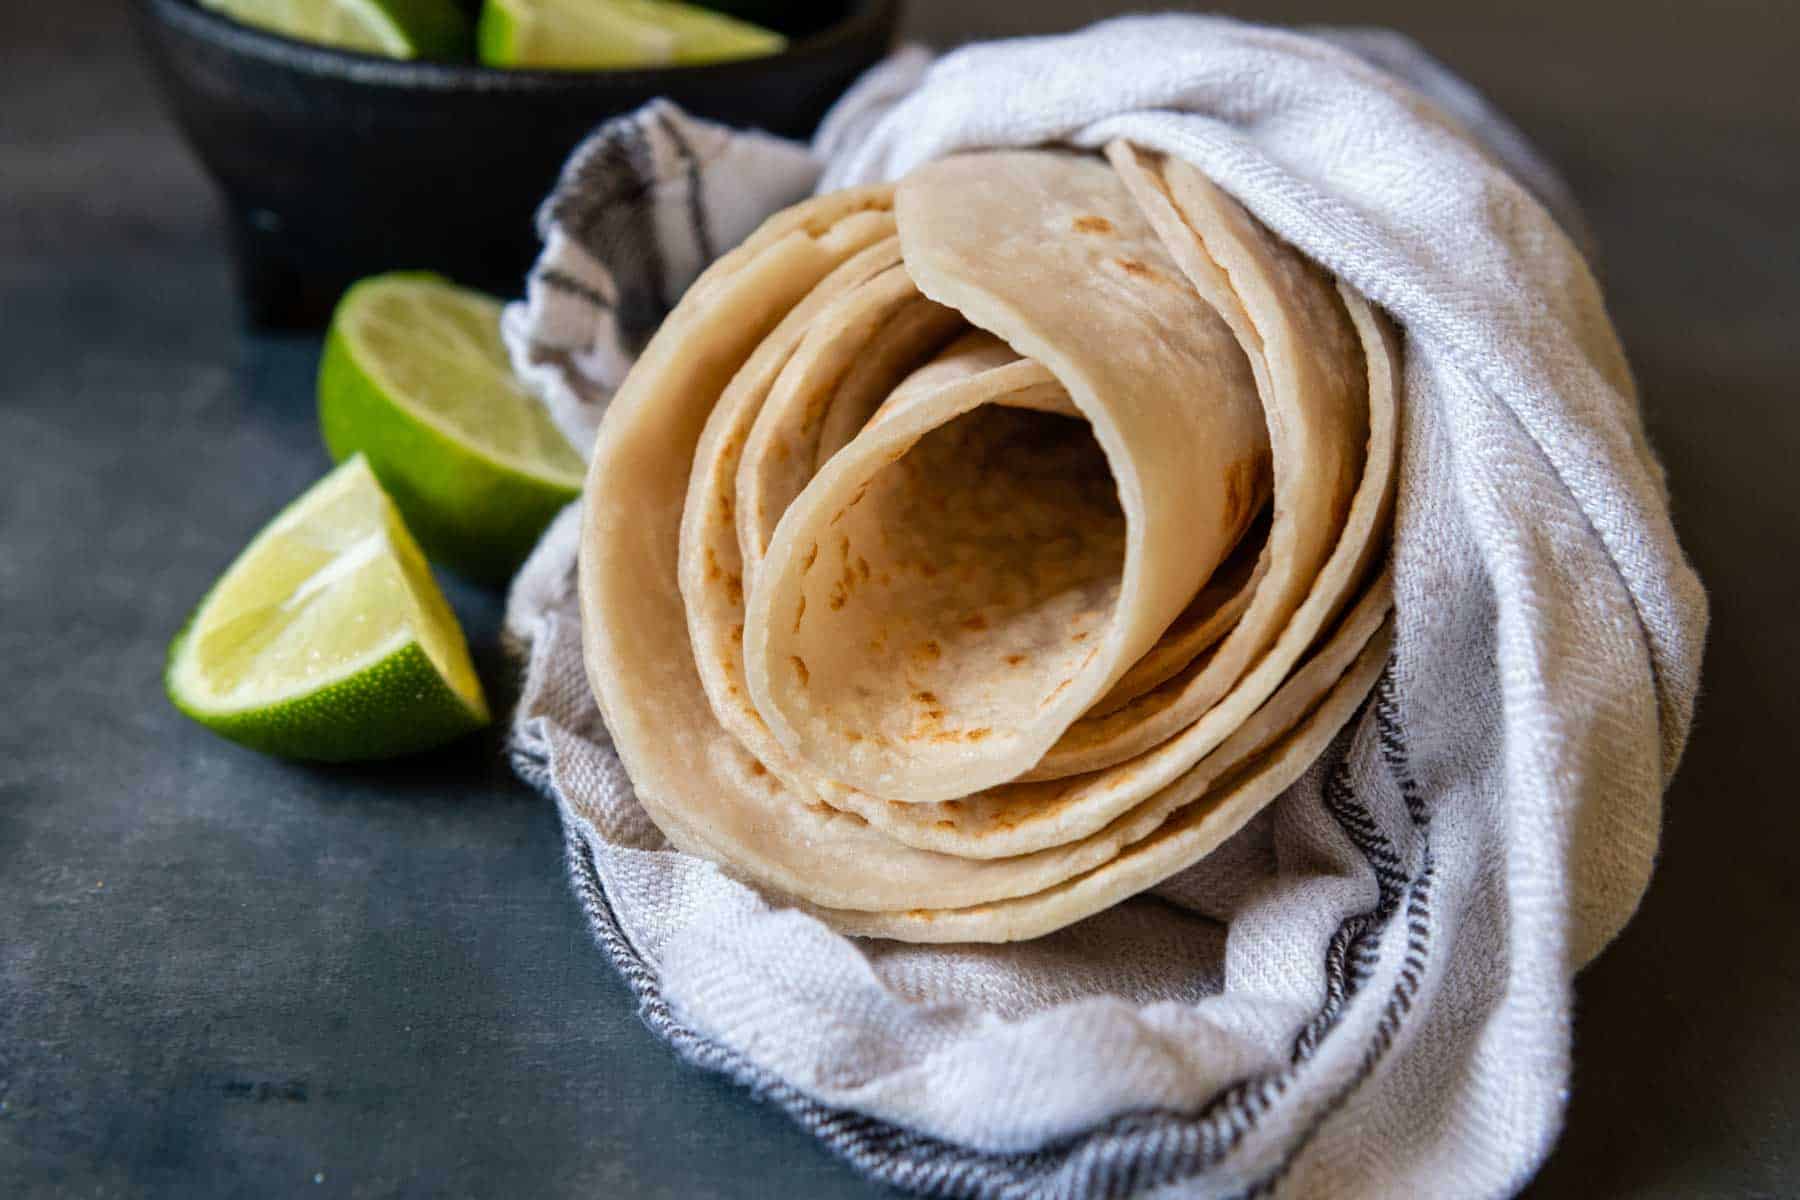 tortillas rolled together and wrapped in a towel.